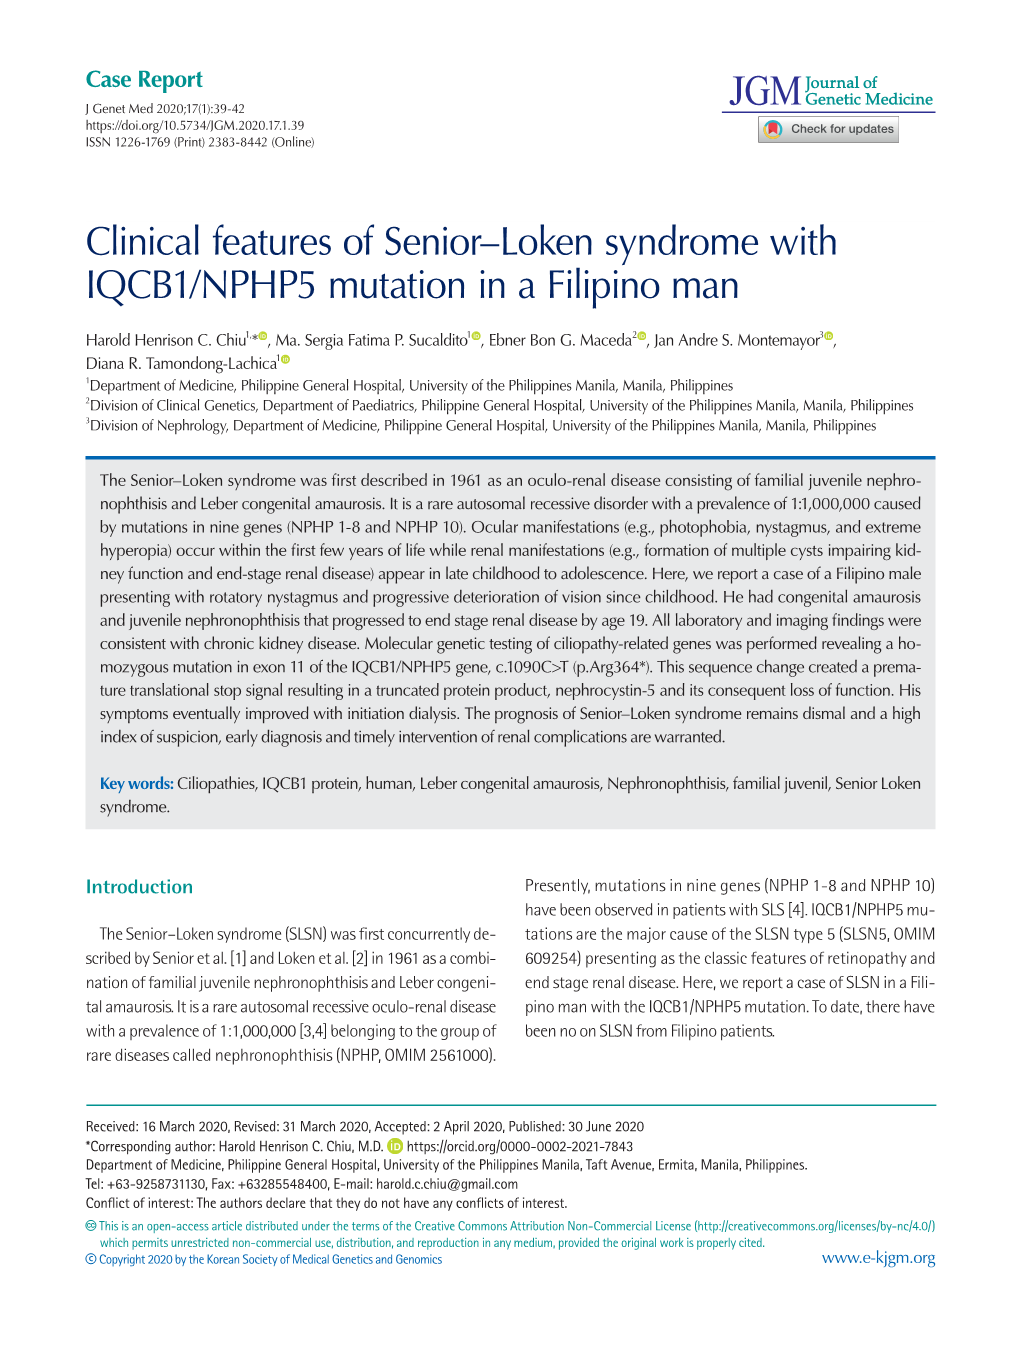 Clinical Features of Senior–Loken Syndrome with IQCB1/NPHP5 Mutation in a Filipino Man